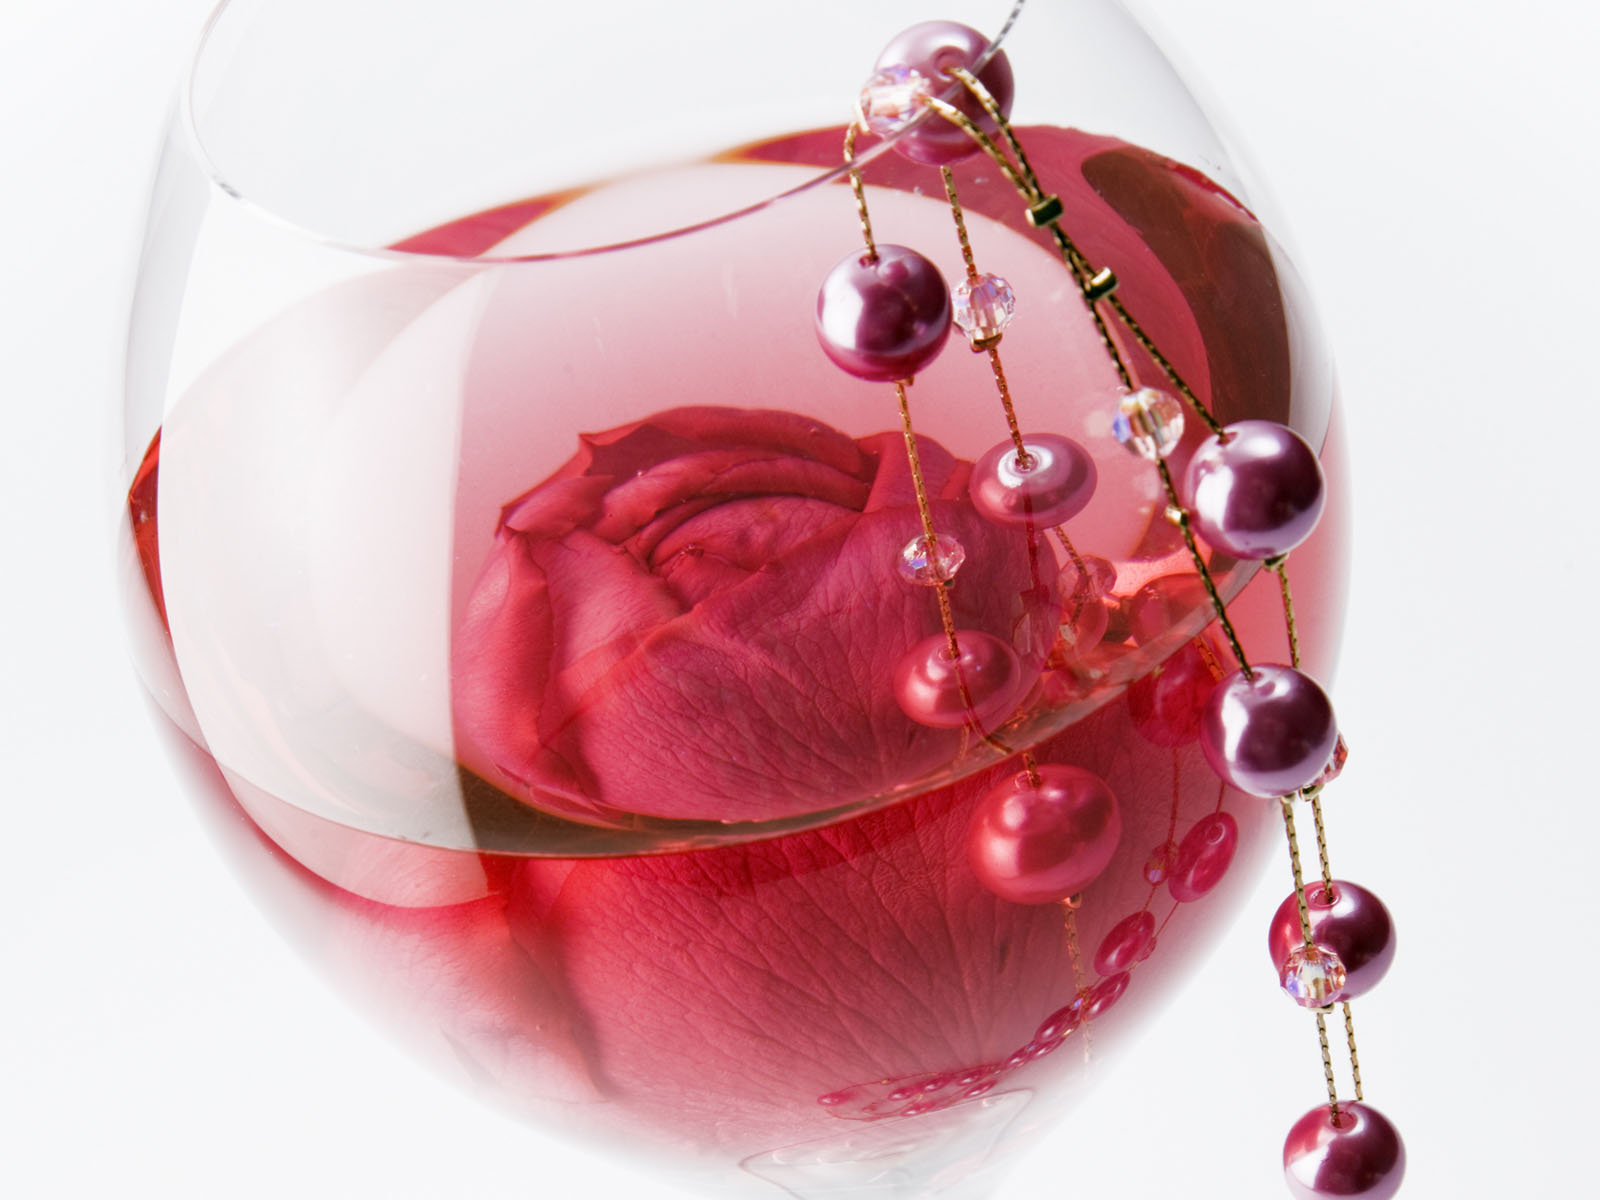 Rose in the glass at the March 8 Desktop wallpapers 1600x1200